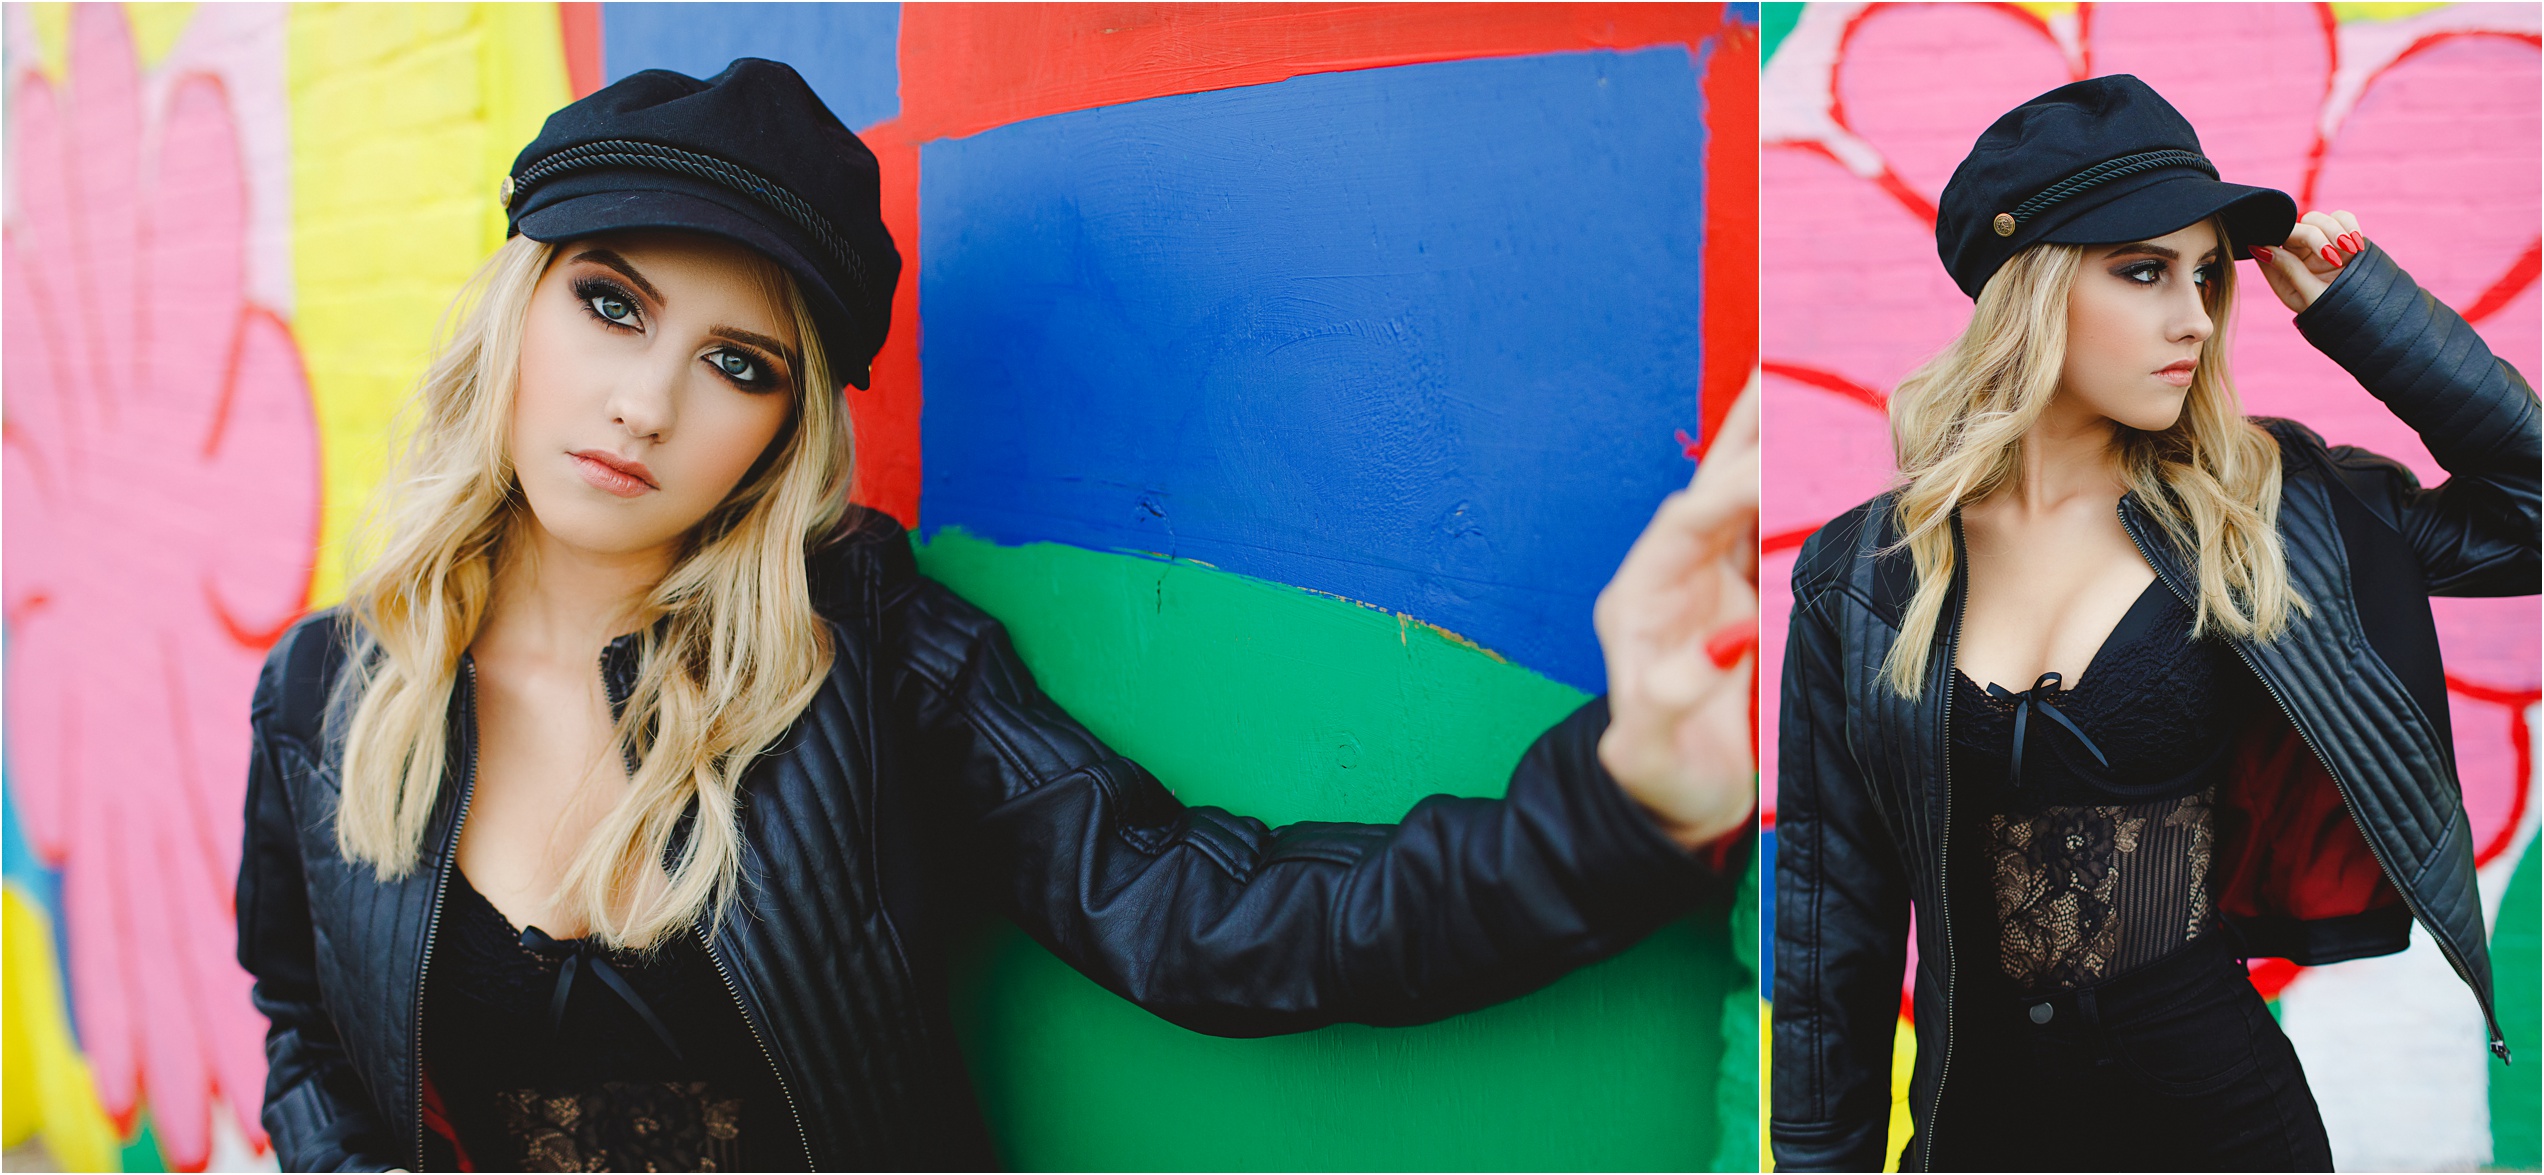 Andrina posing against the wall in an all black outfit in front of a colorful mural.